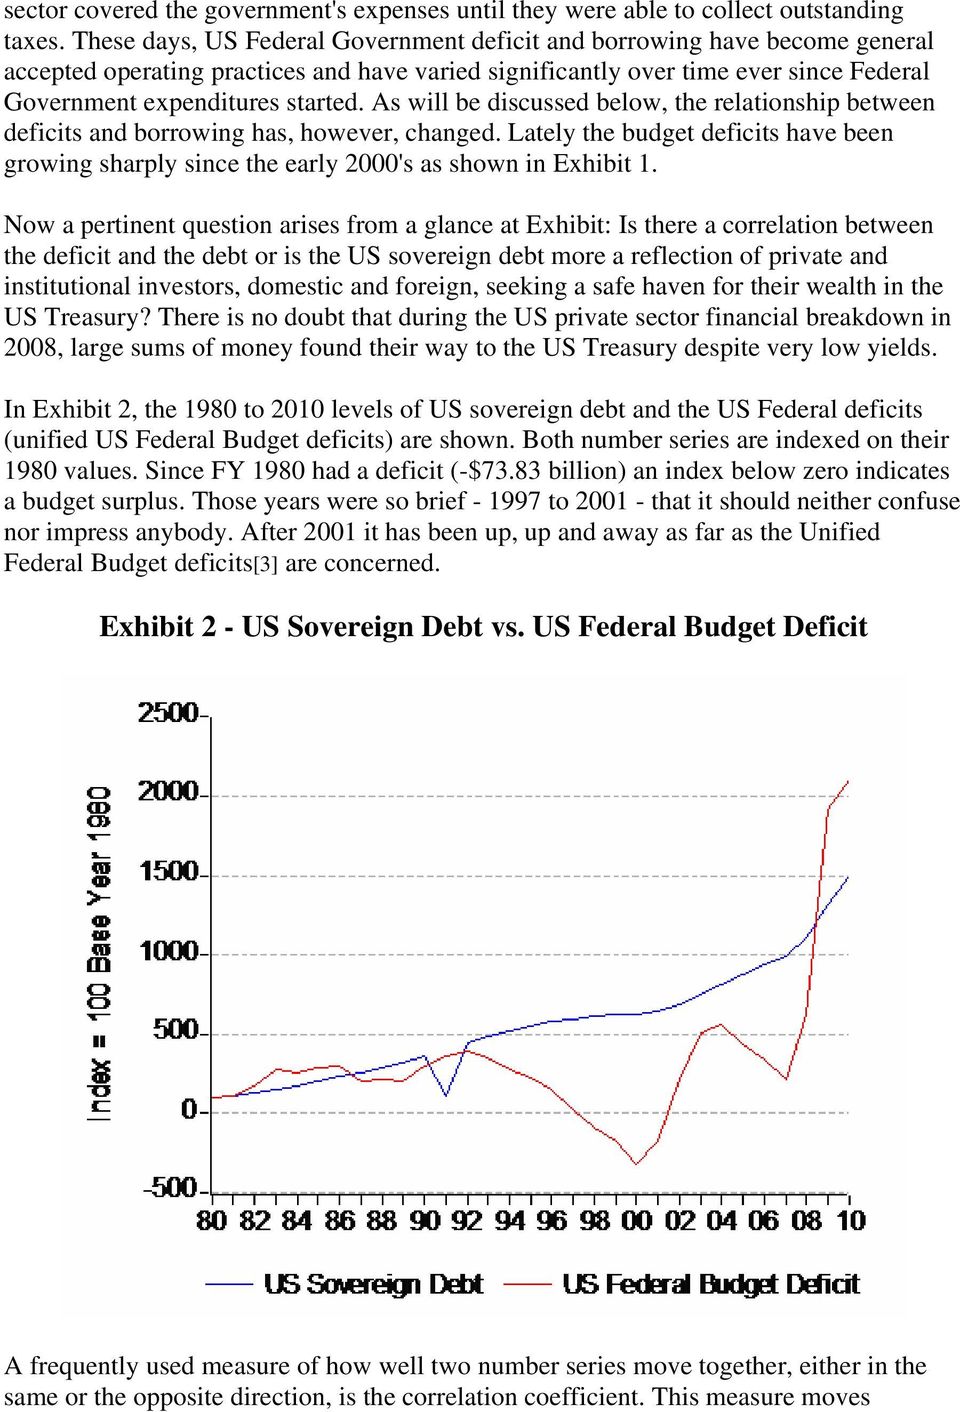 As will be discussed below, the relationship between deficits and borrowing has, however, changed. Lately the budget deficits have been growing sharply since the early 2000's as shown in Exhibit 1.